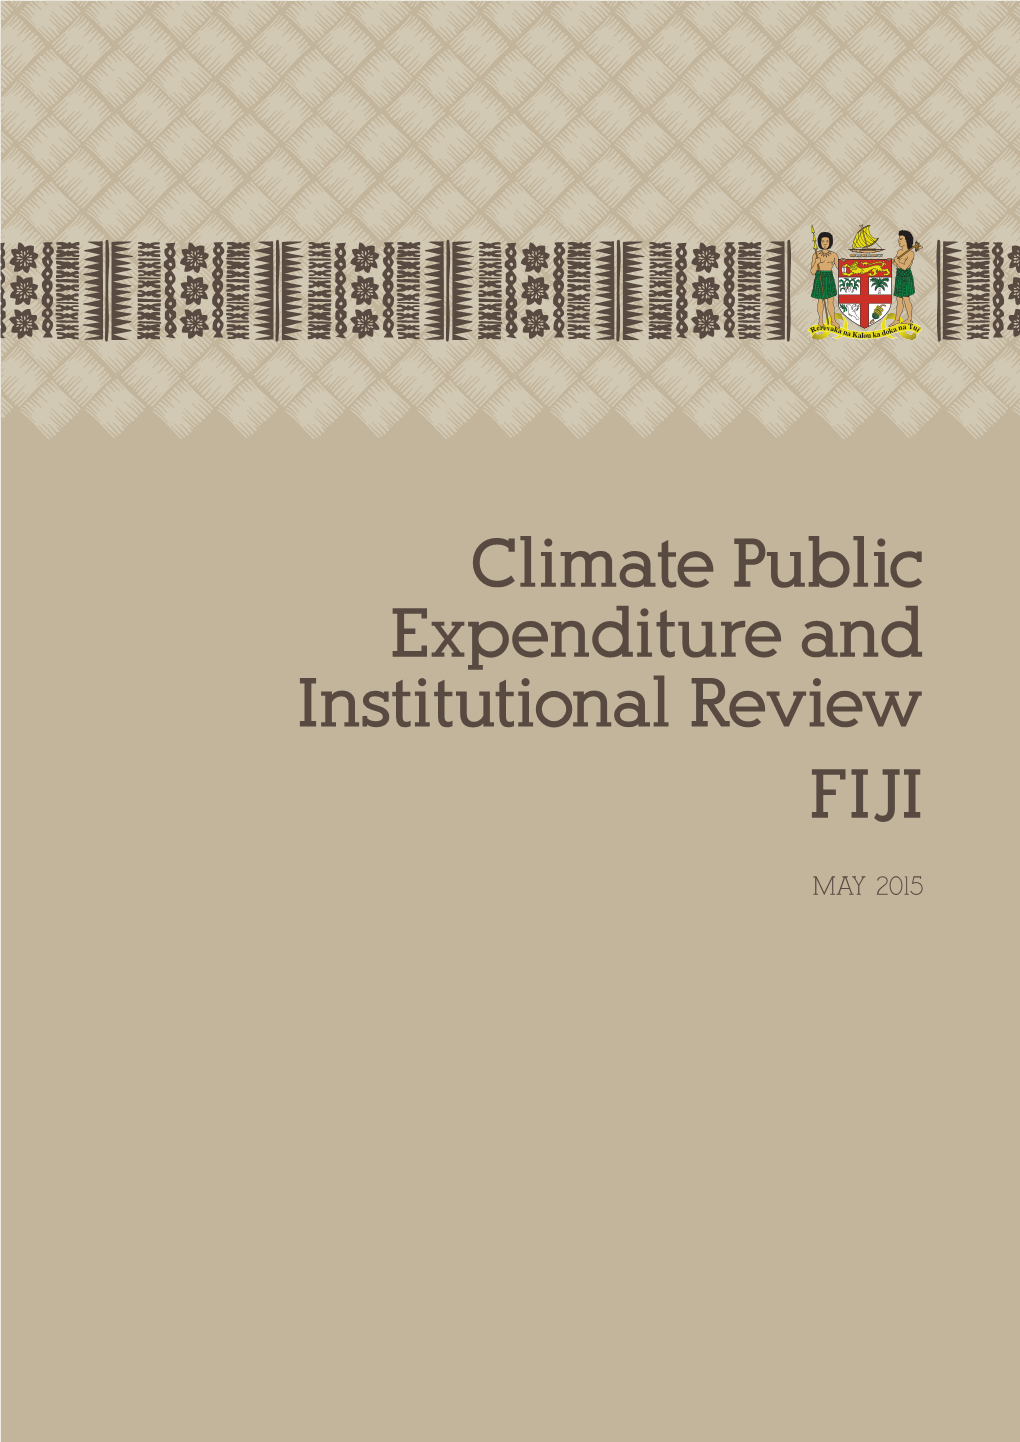 Climate Public Expenditure and Institutional Review FIJI